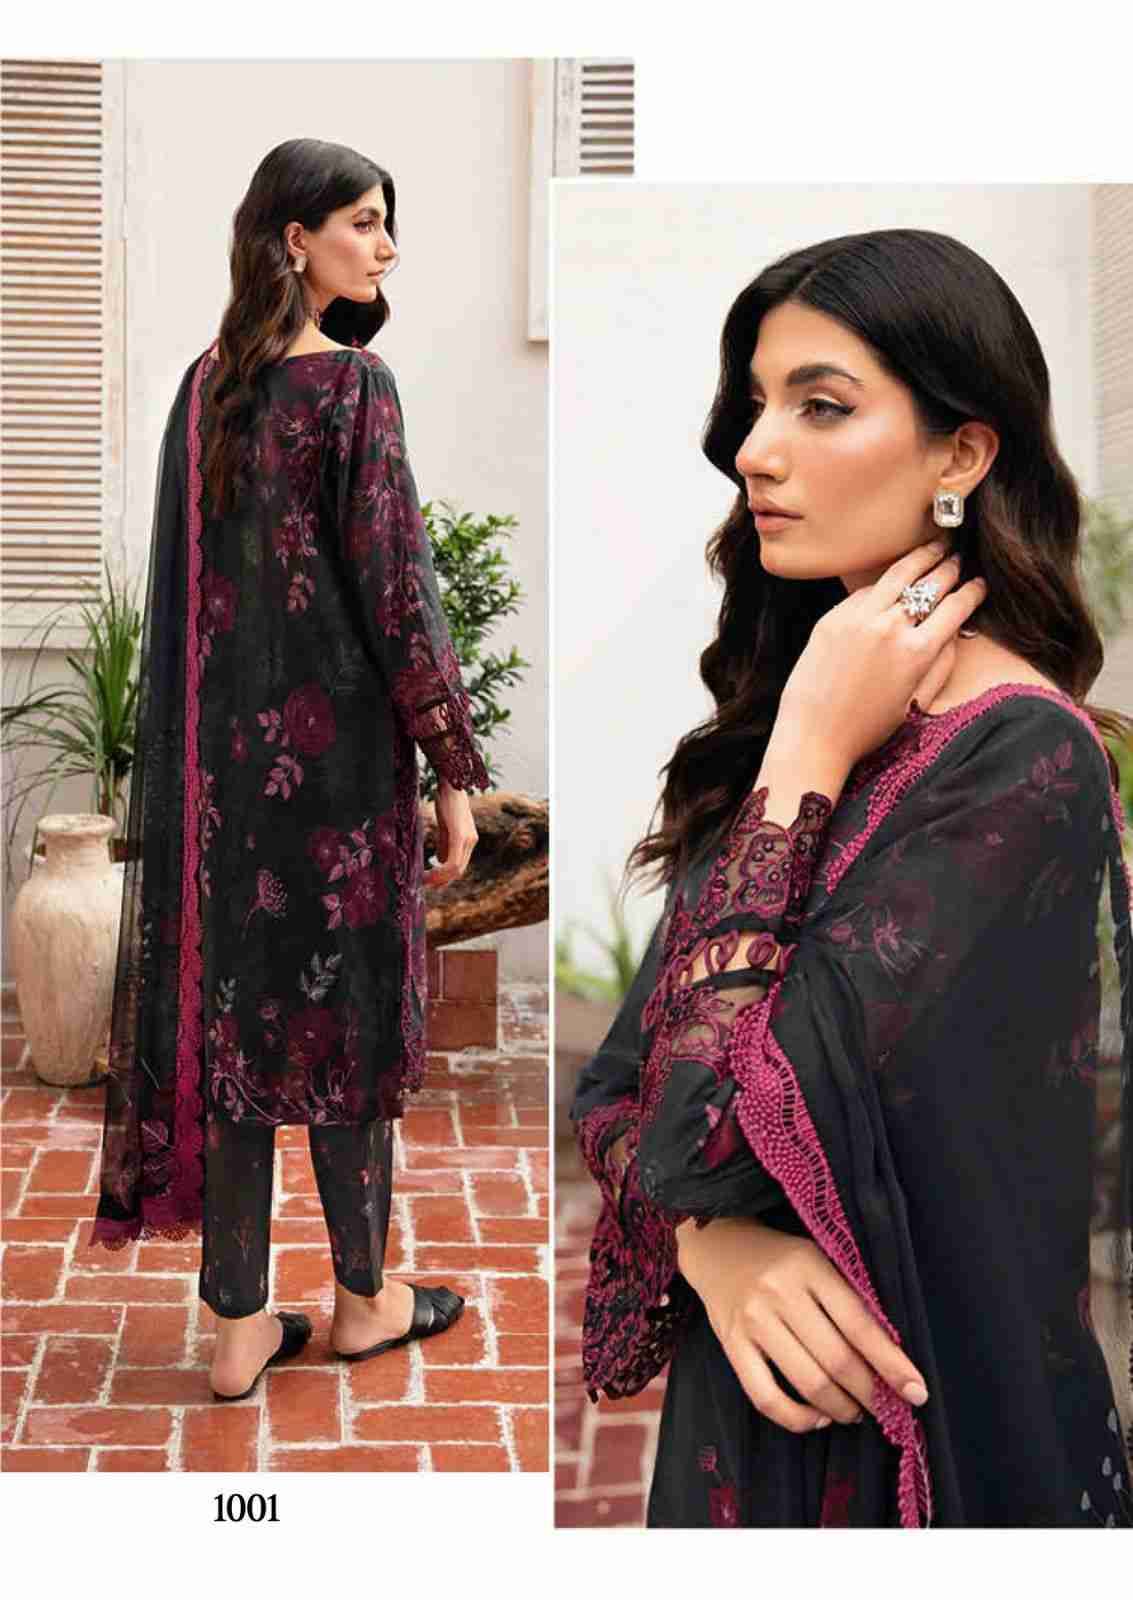 Rangrez Vol-2 By Hala 1001 To 1006 Series Beautiful Pakistani Suits Stylish Colorful Fancy Casual Wear & Ethnic Wear Heavy  Cotton Print Dresses At Wholesale Price